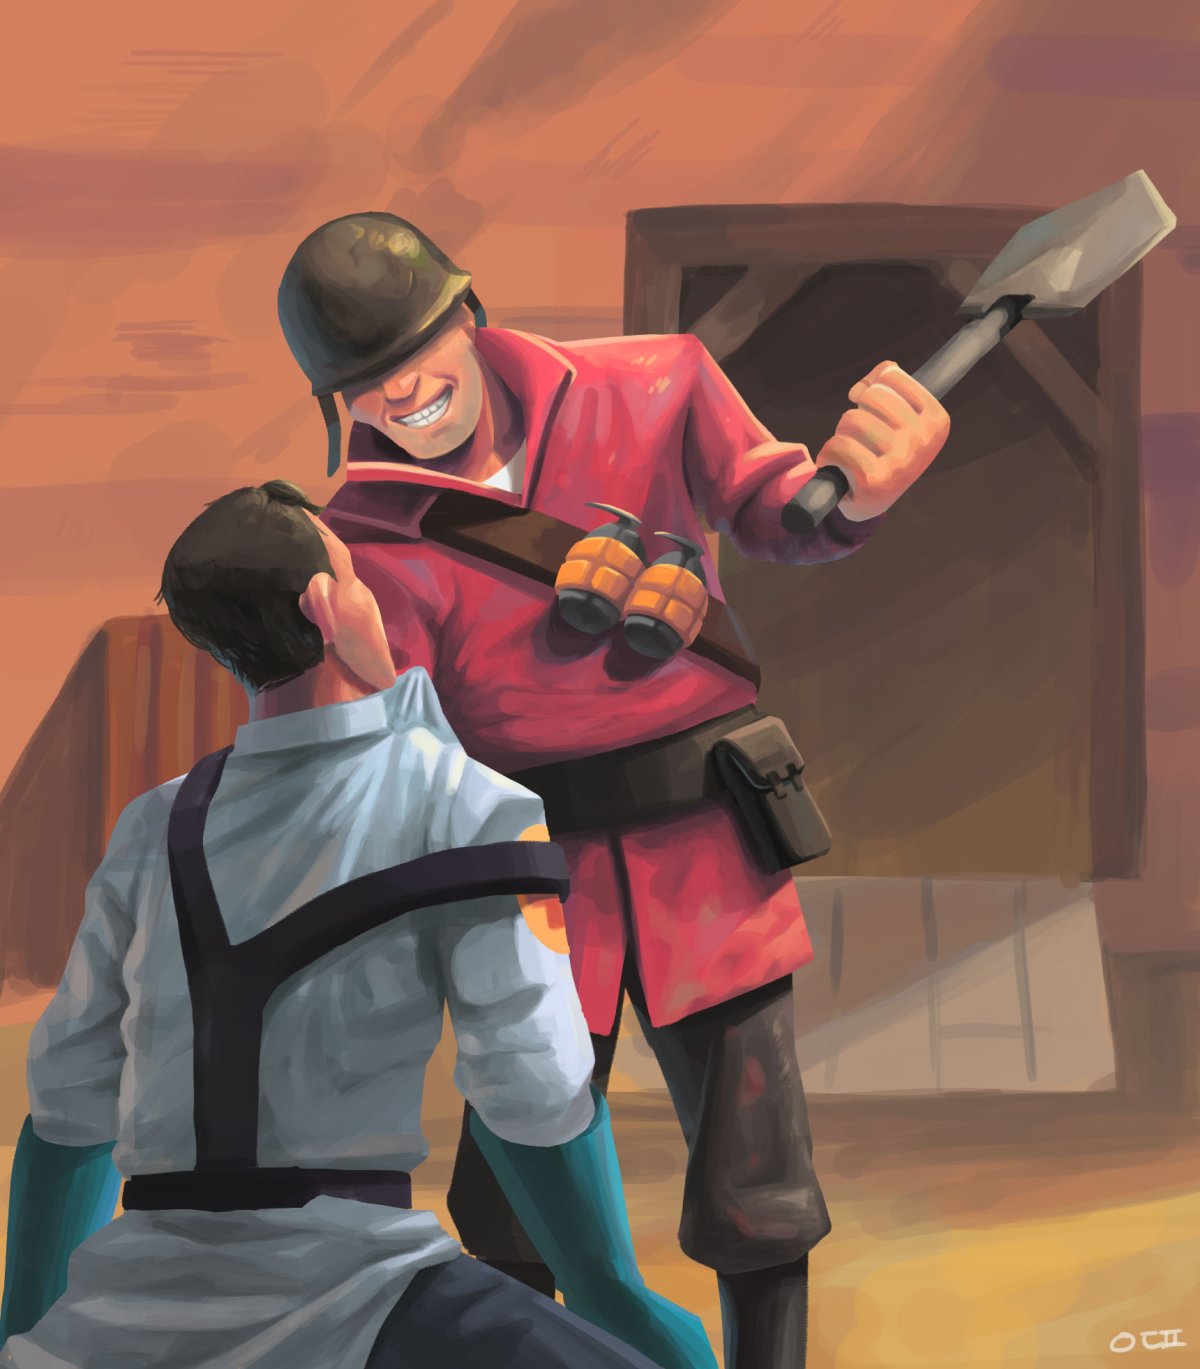 Tf2 avatars for steam фото 72